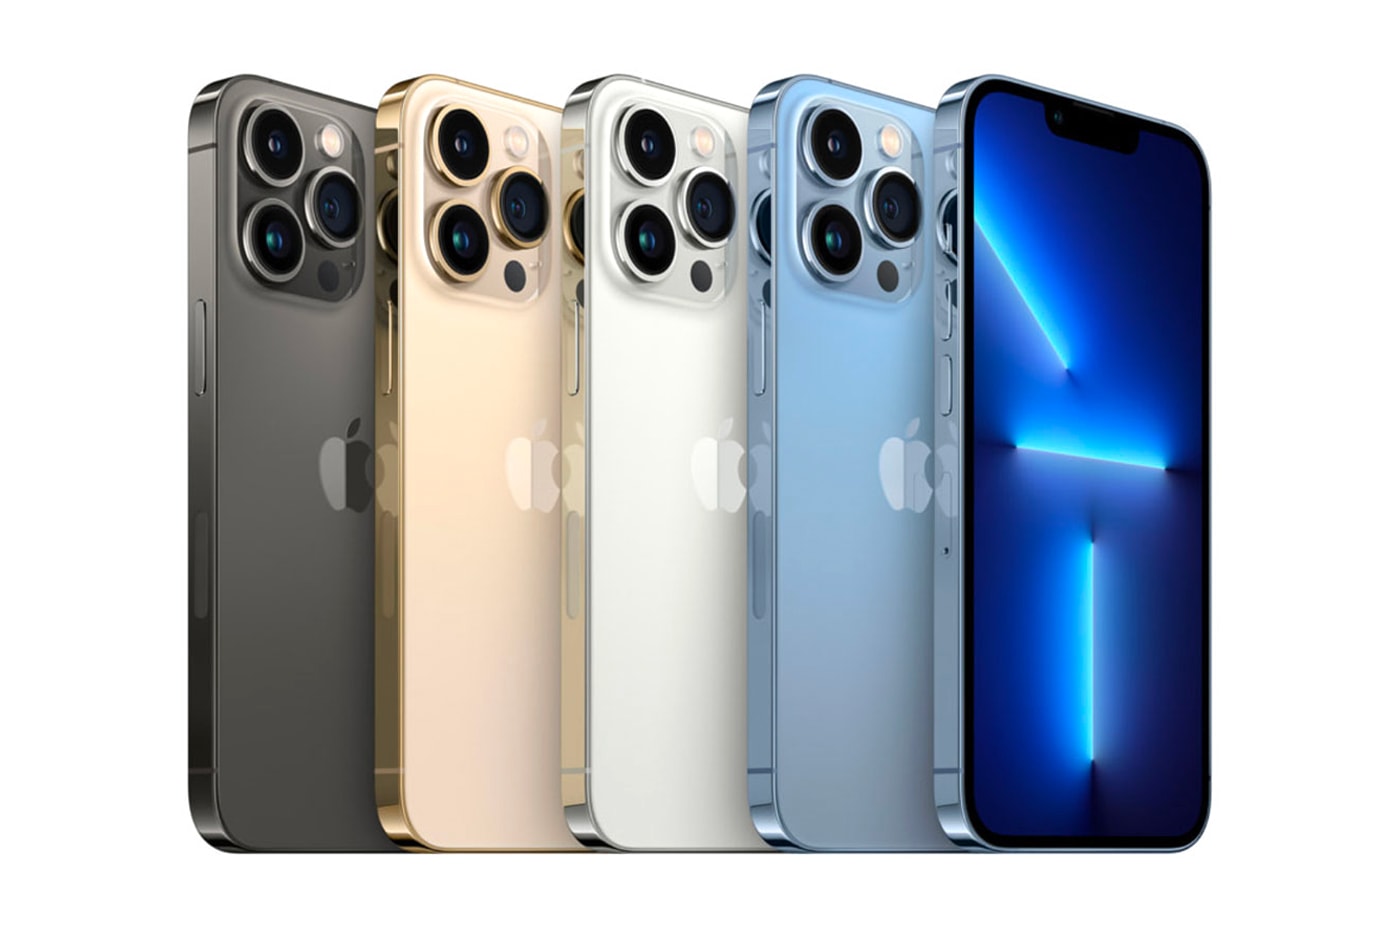 Apple Announces iPhone 13 With Redesigned Cameras and 50% Faster Processor